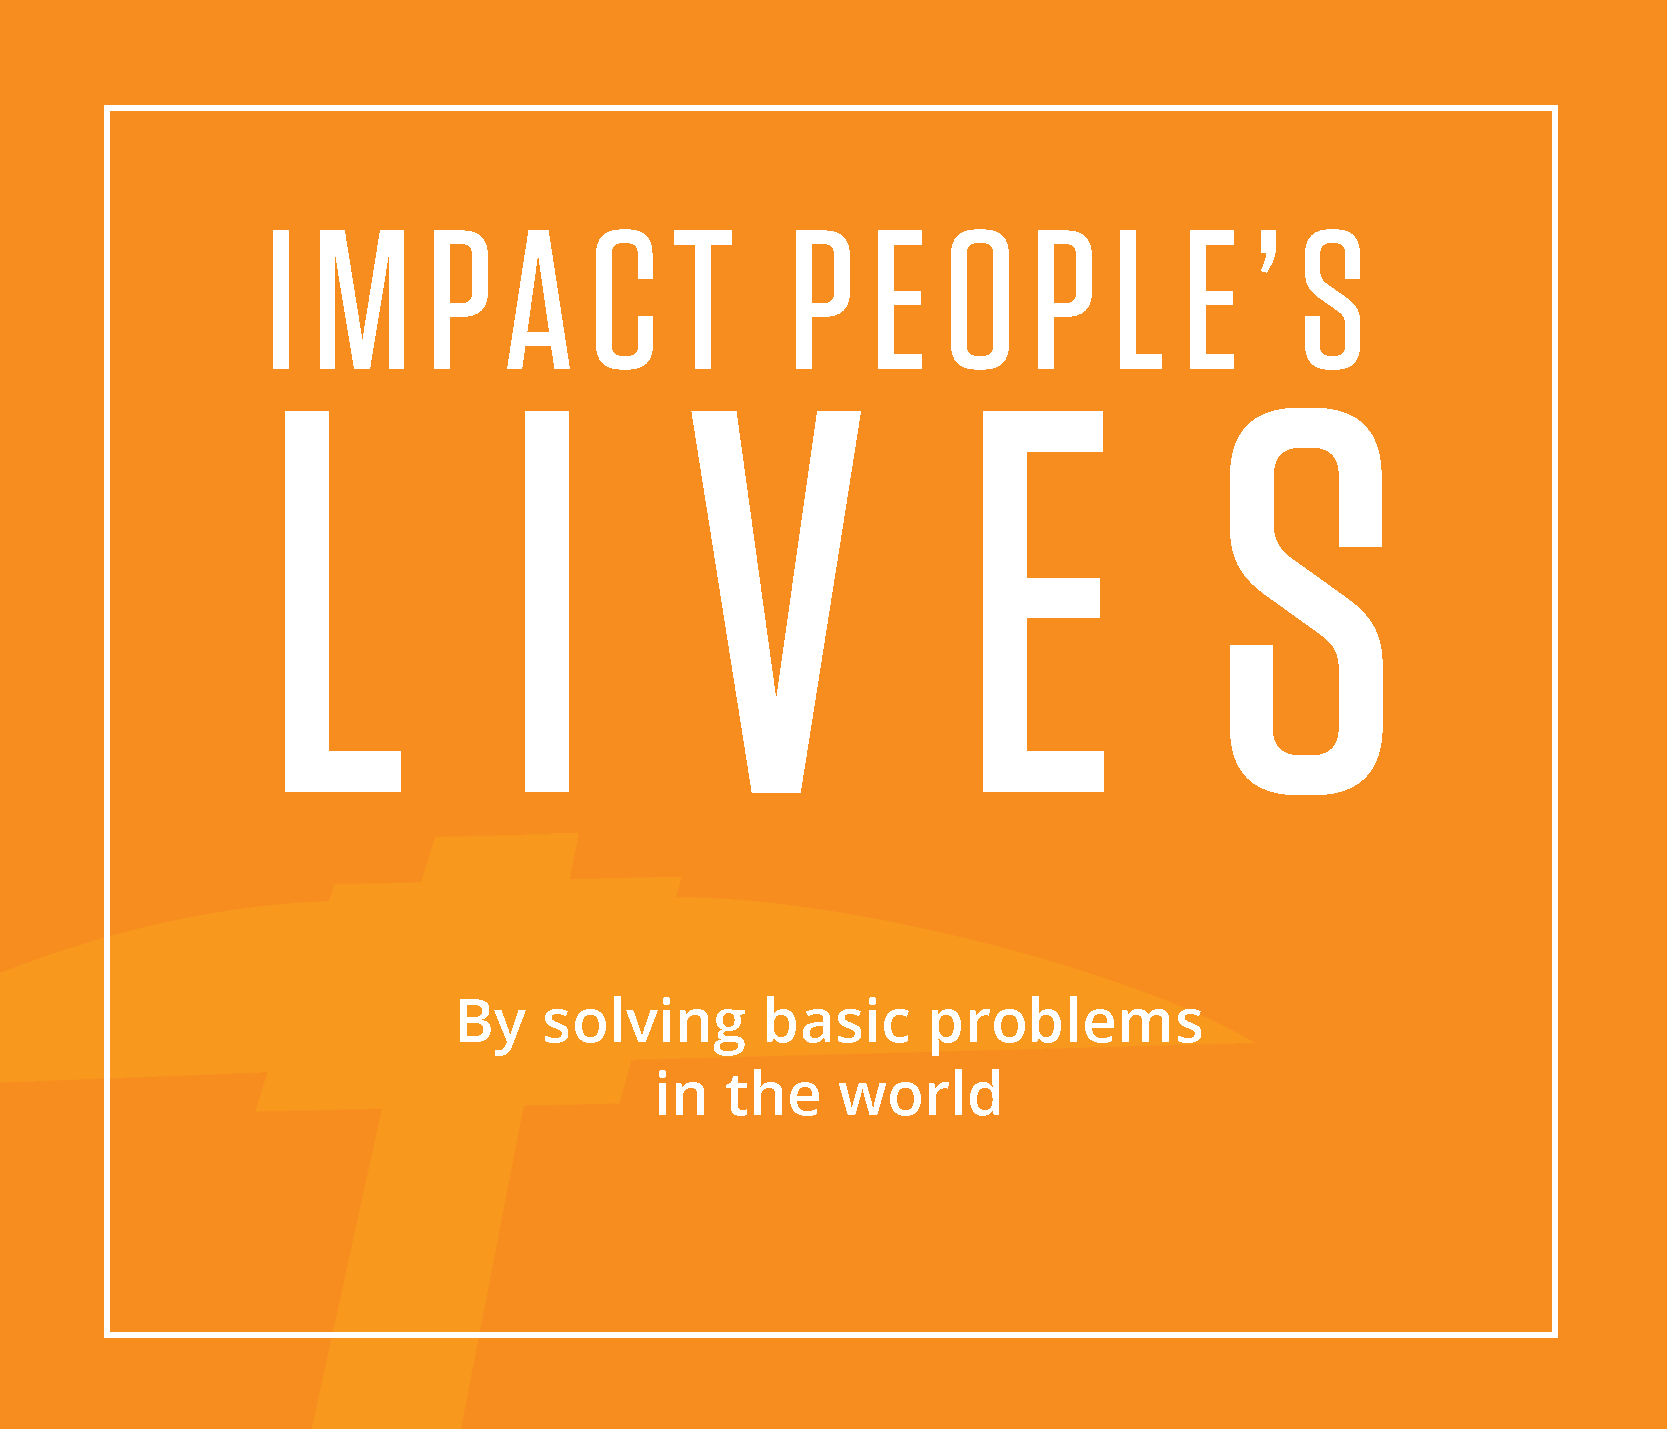 IMPACT LIVES by solving basic problems in the world